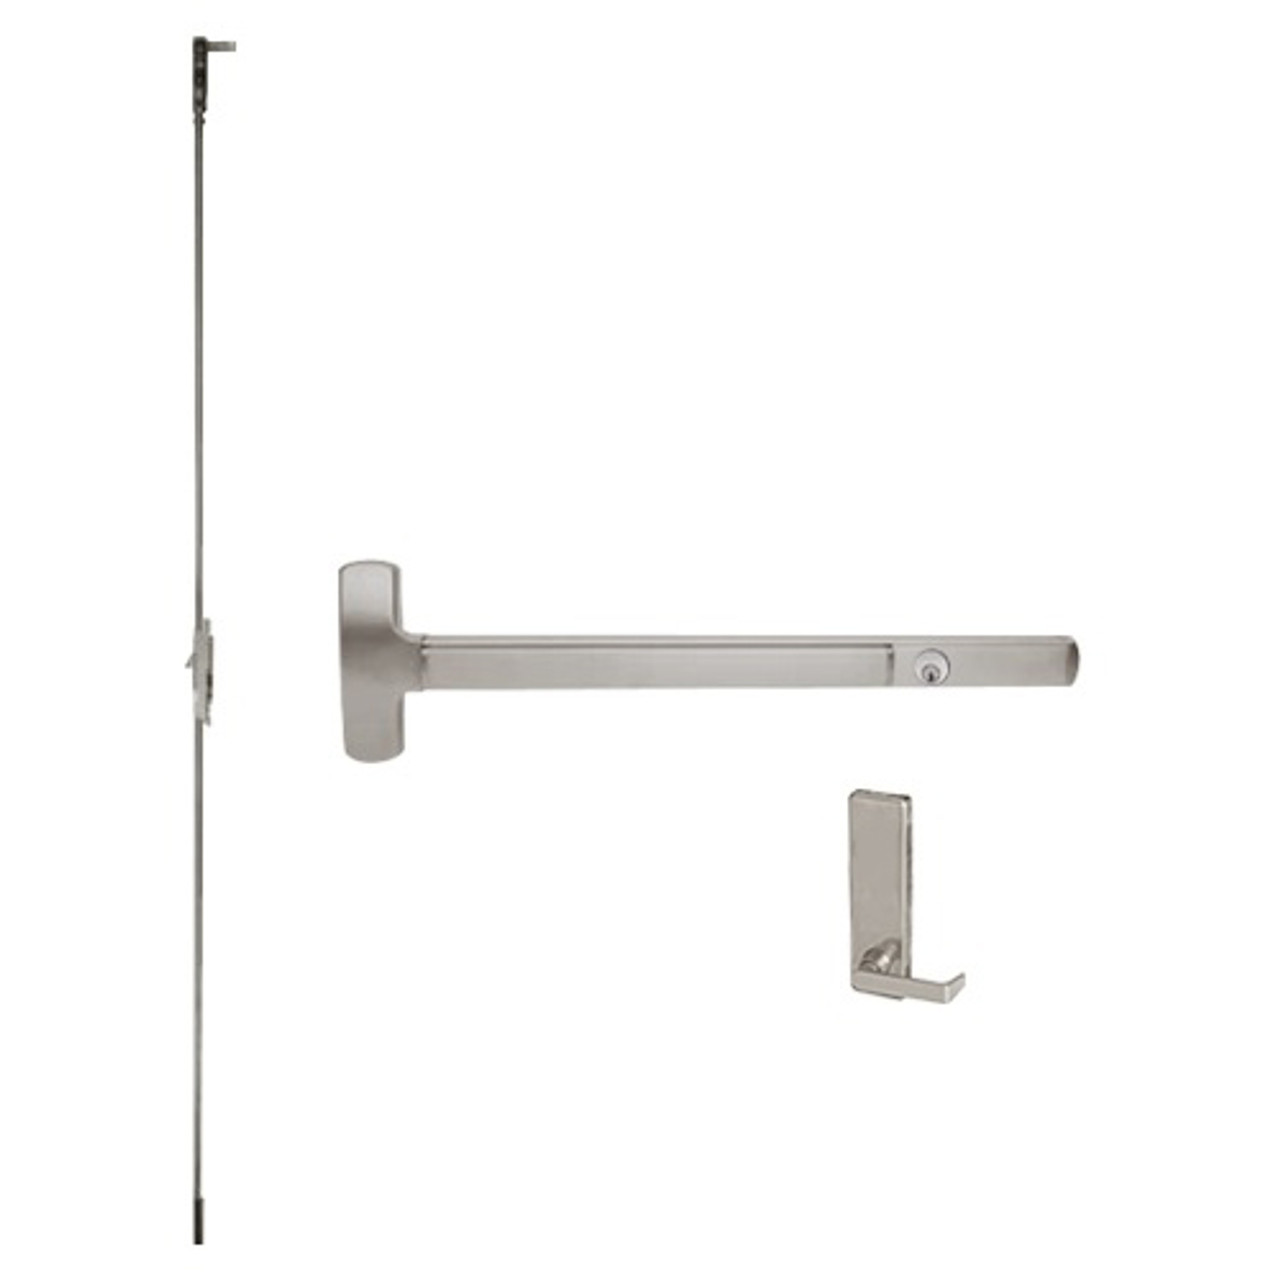 CD25-C-L-DT-DANE-US32D-4-RHR Falcon Exit Device in Satin Stainless Steel